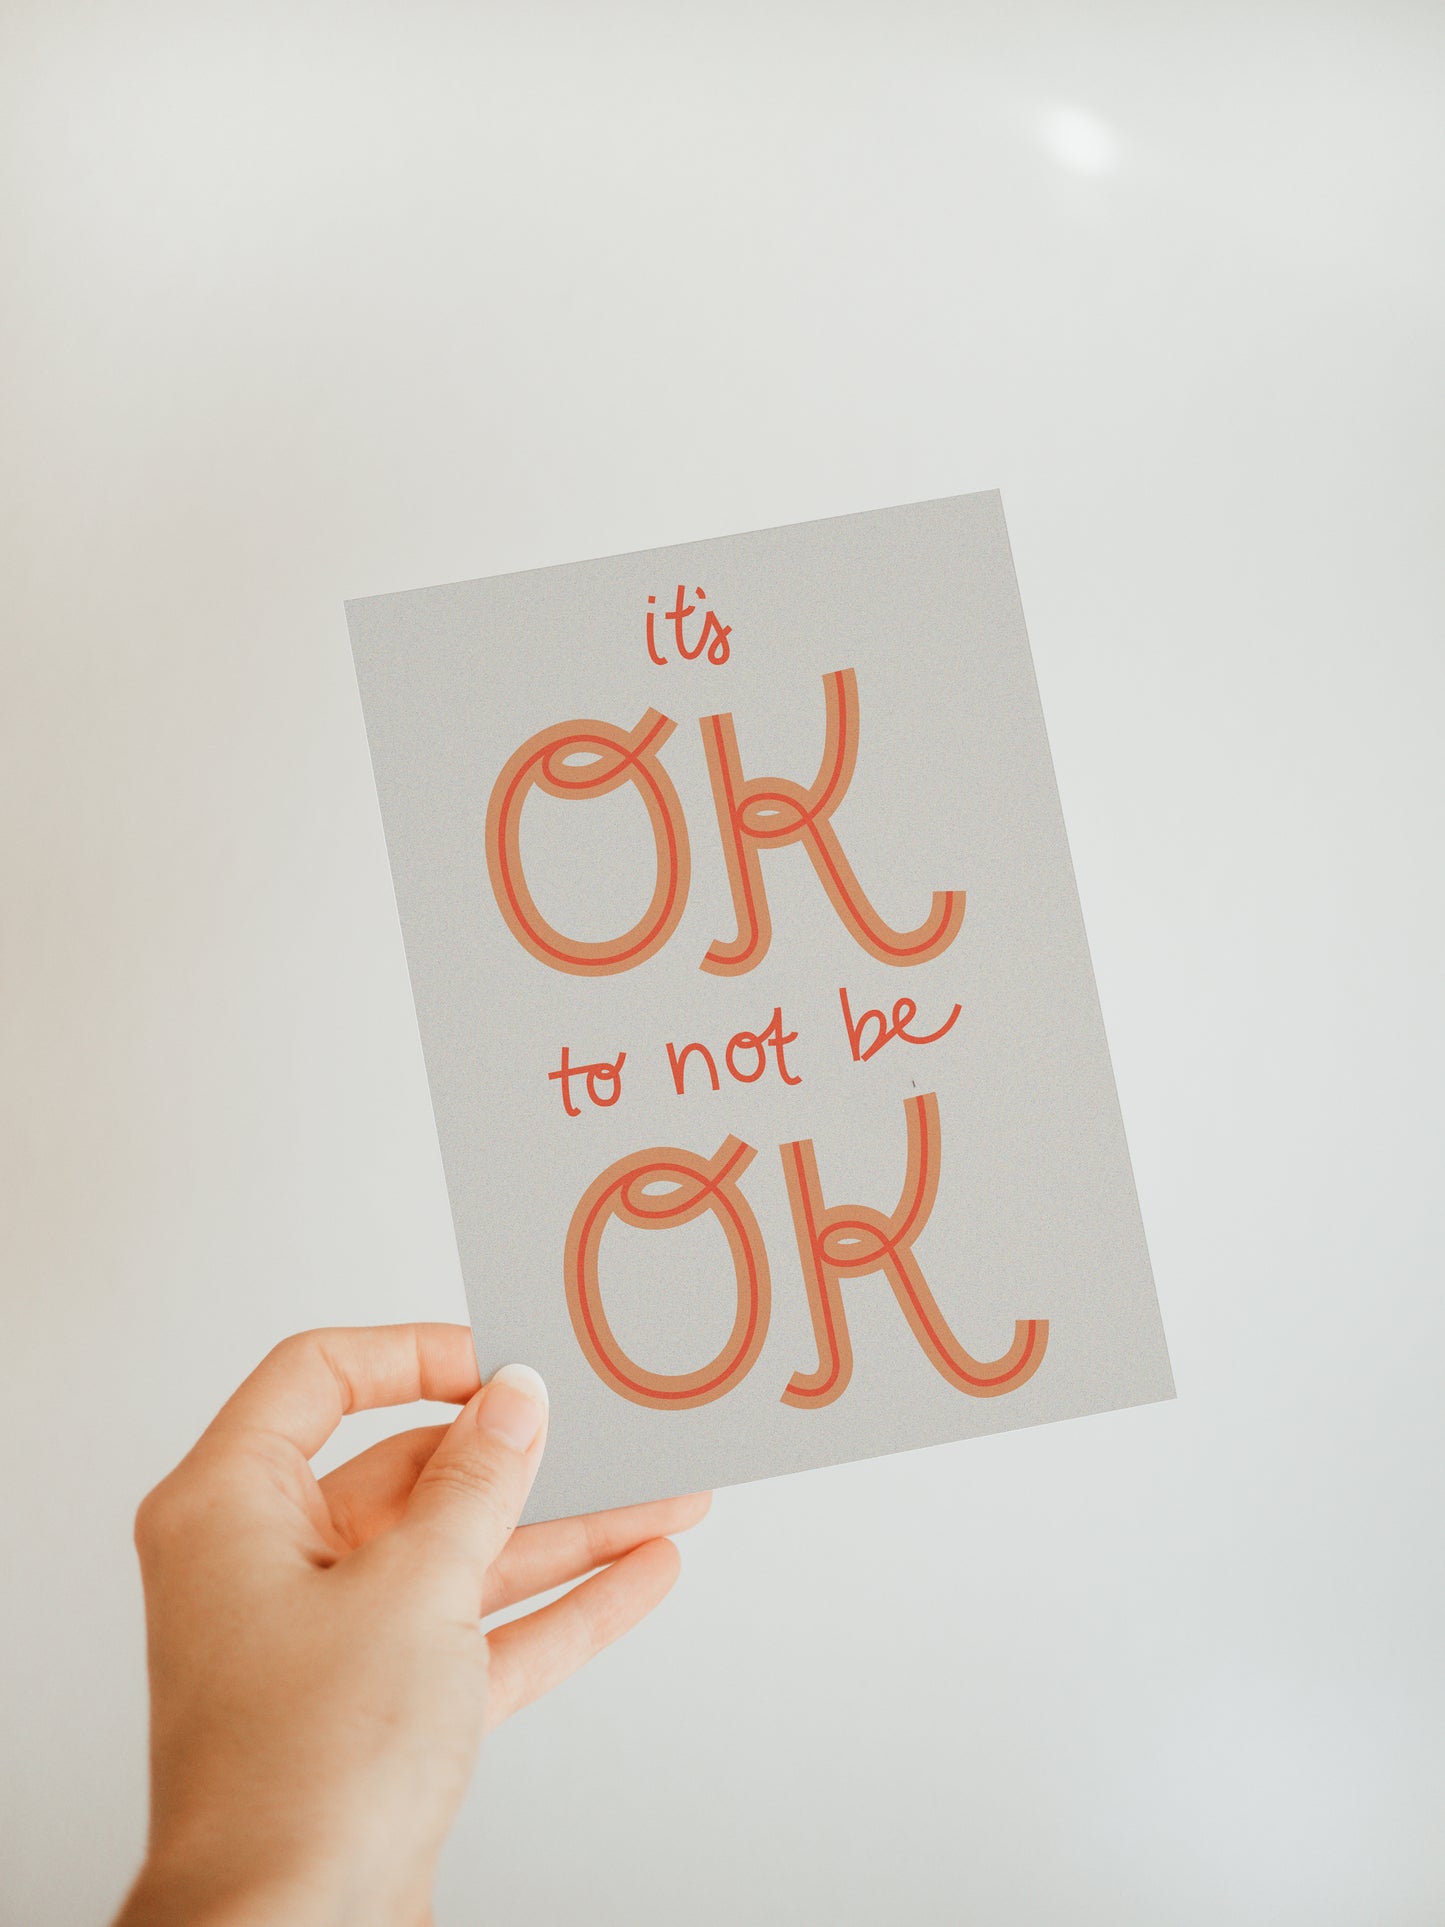 hand holding an off-white greeting card that says "it's ok to not be ok" in dark orange font